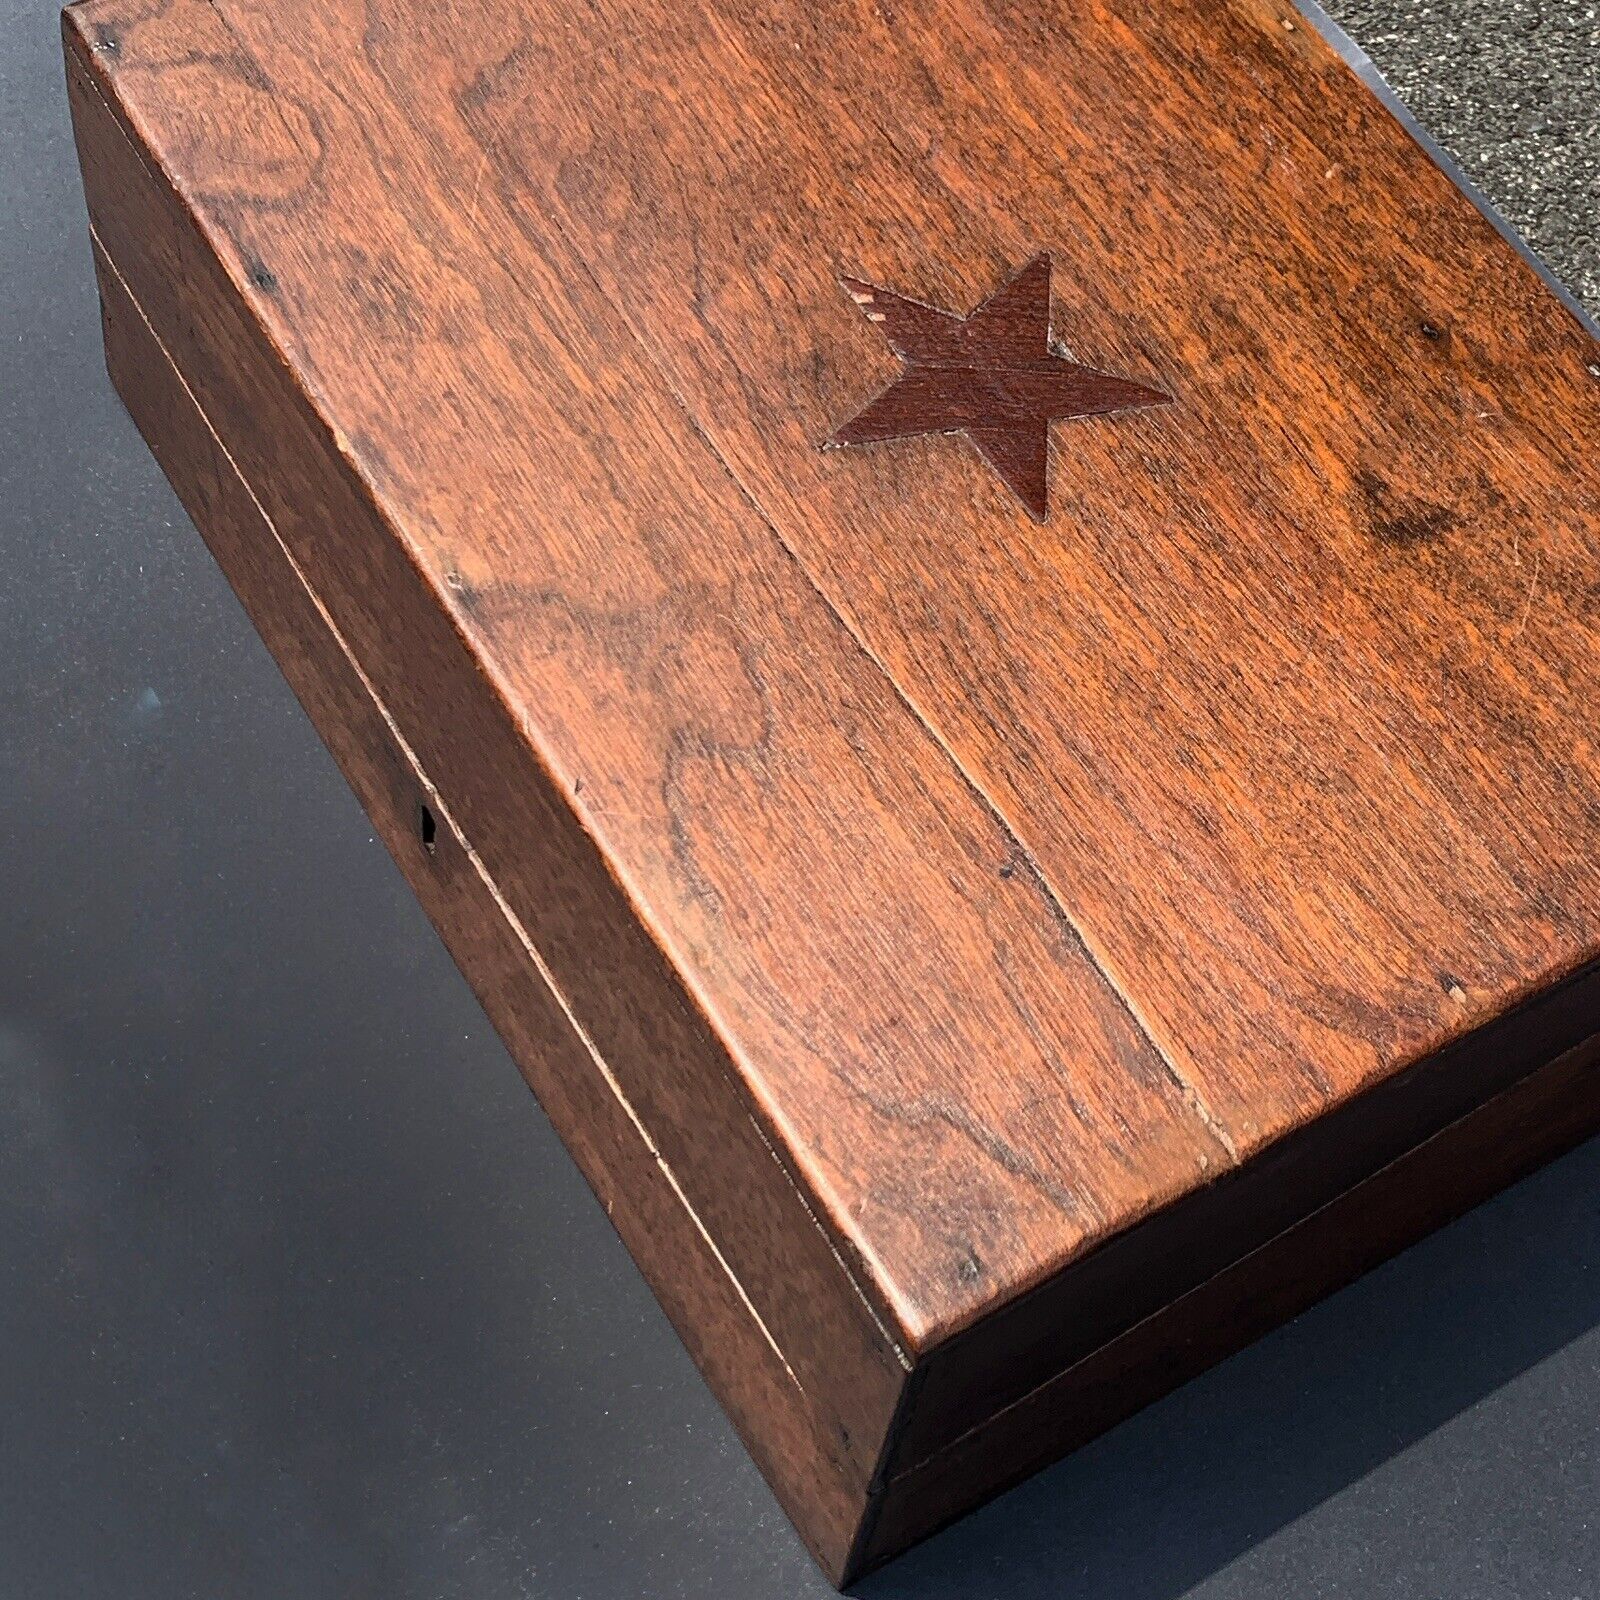 Writing Box Antique Wood Lap Desk with Inlay Star 14x10x5 inches